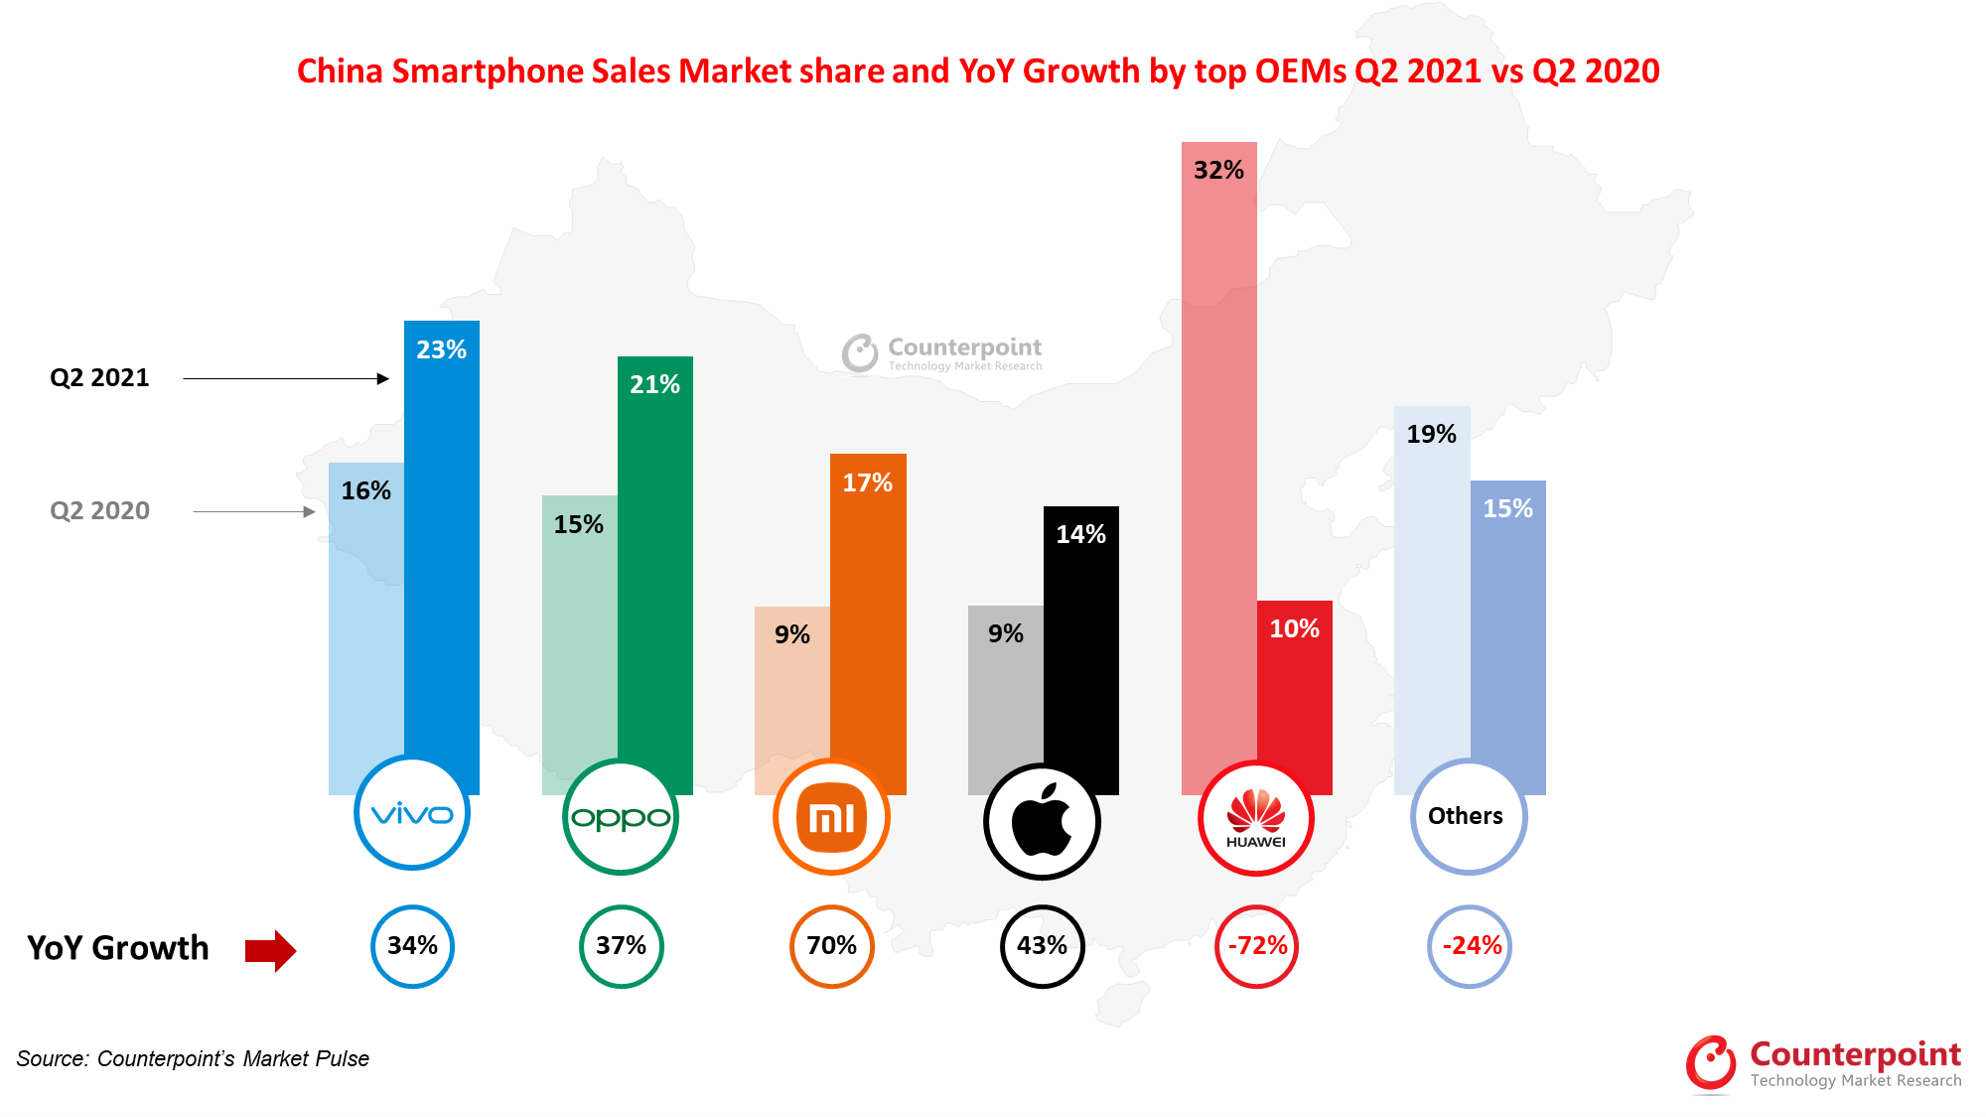 Counterpoint Research China Smartphone Sales Market Share Q2 2021